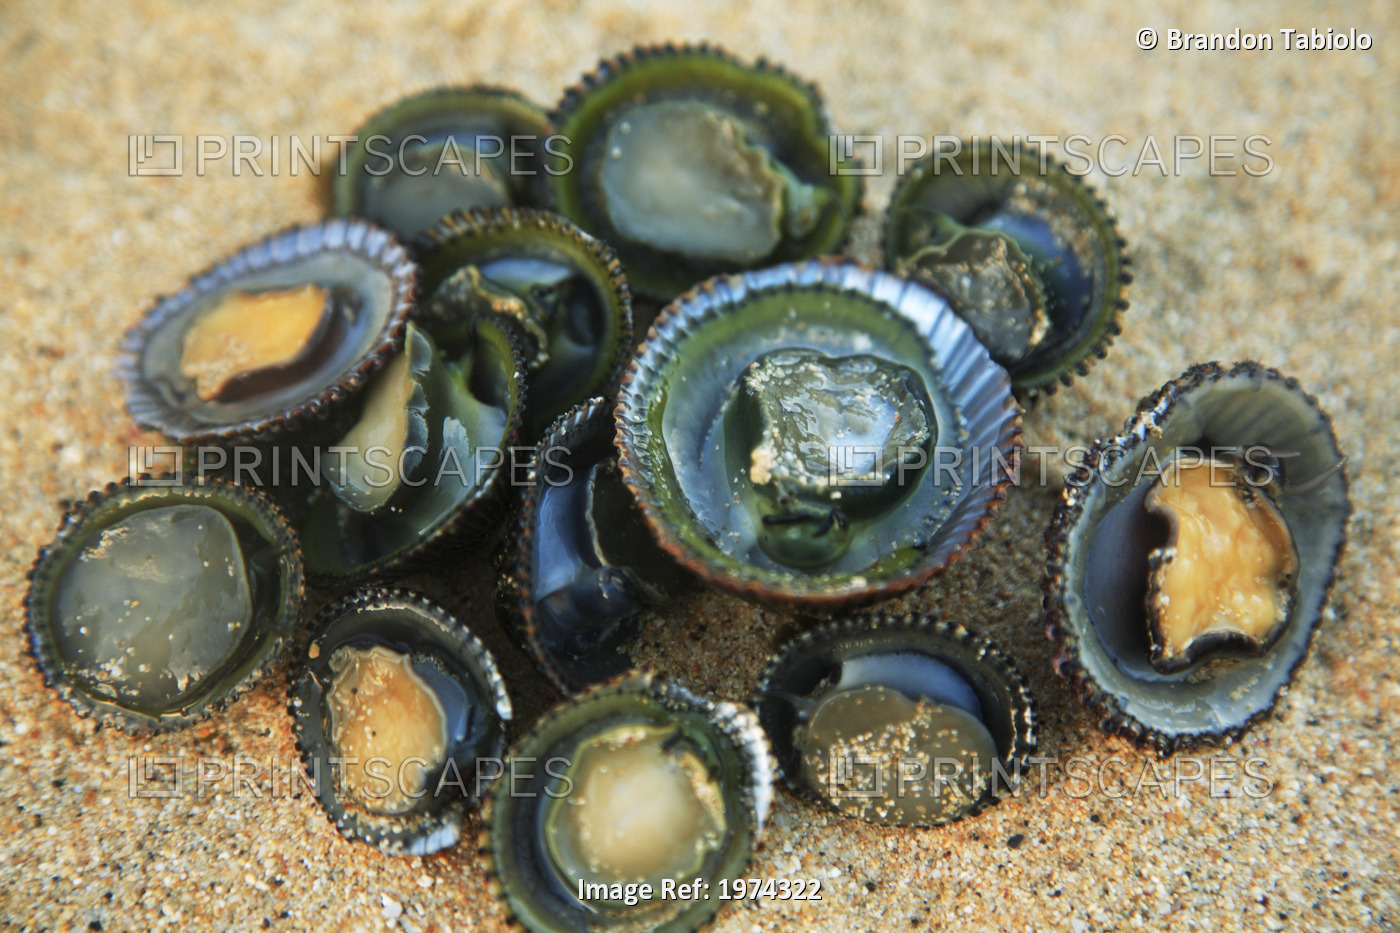 Hawaii, Oahu, A Bunch Of Fresh Limpets Opihi Laying On Sand.